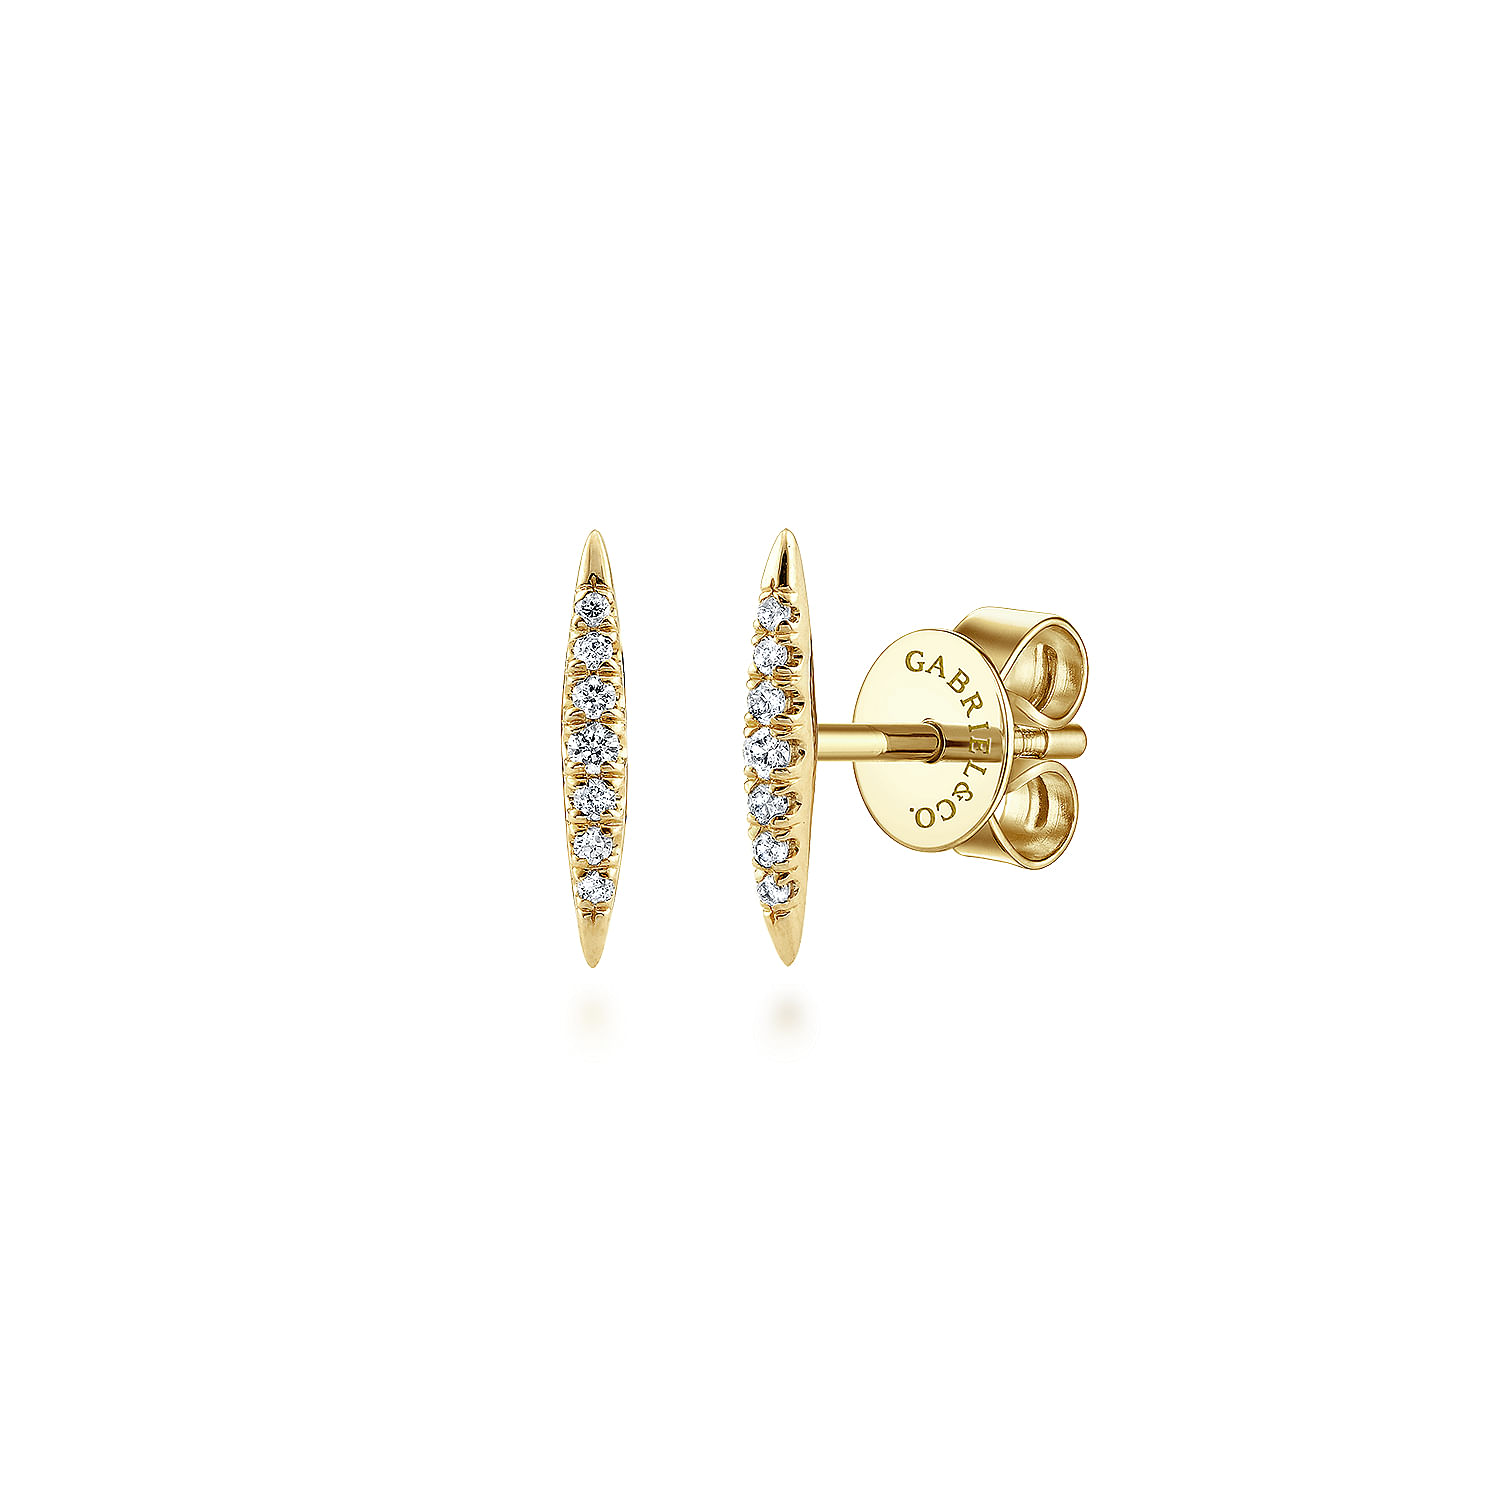 14K Yellow Gold Pave Diamond Spiked Stud Earrings